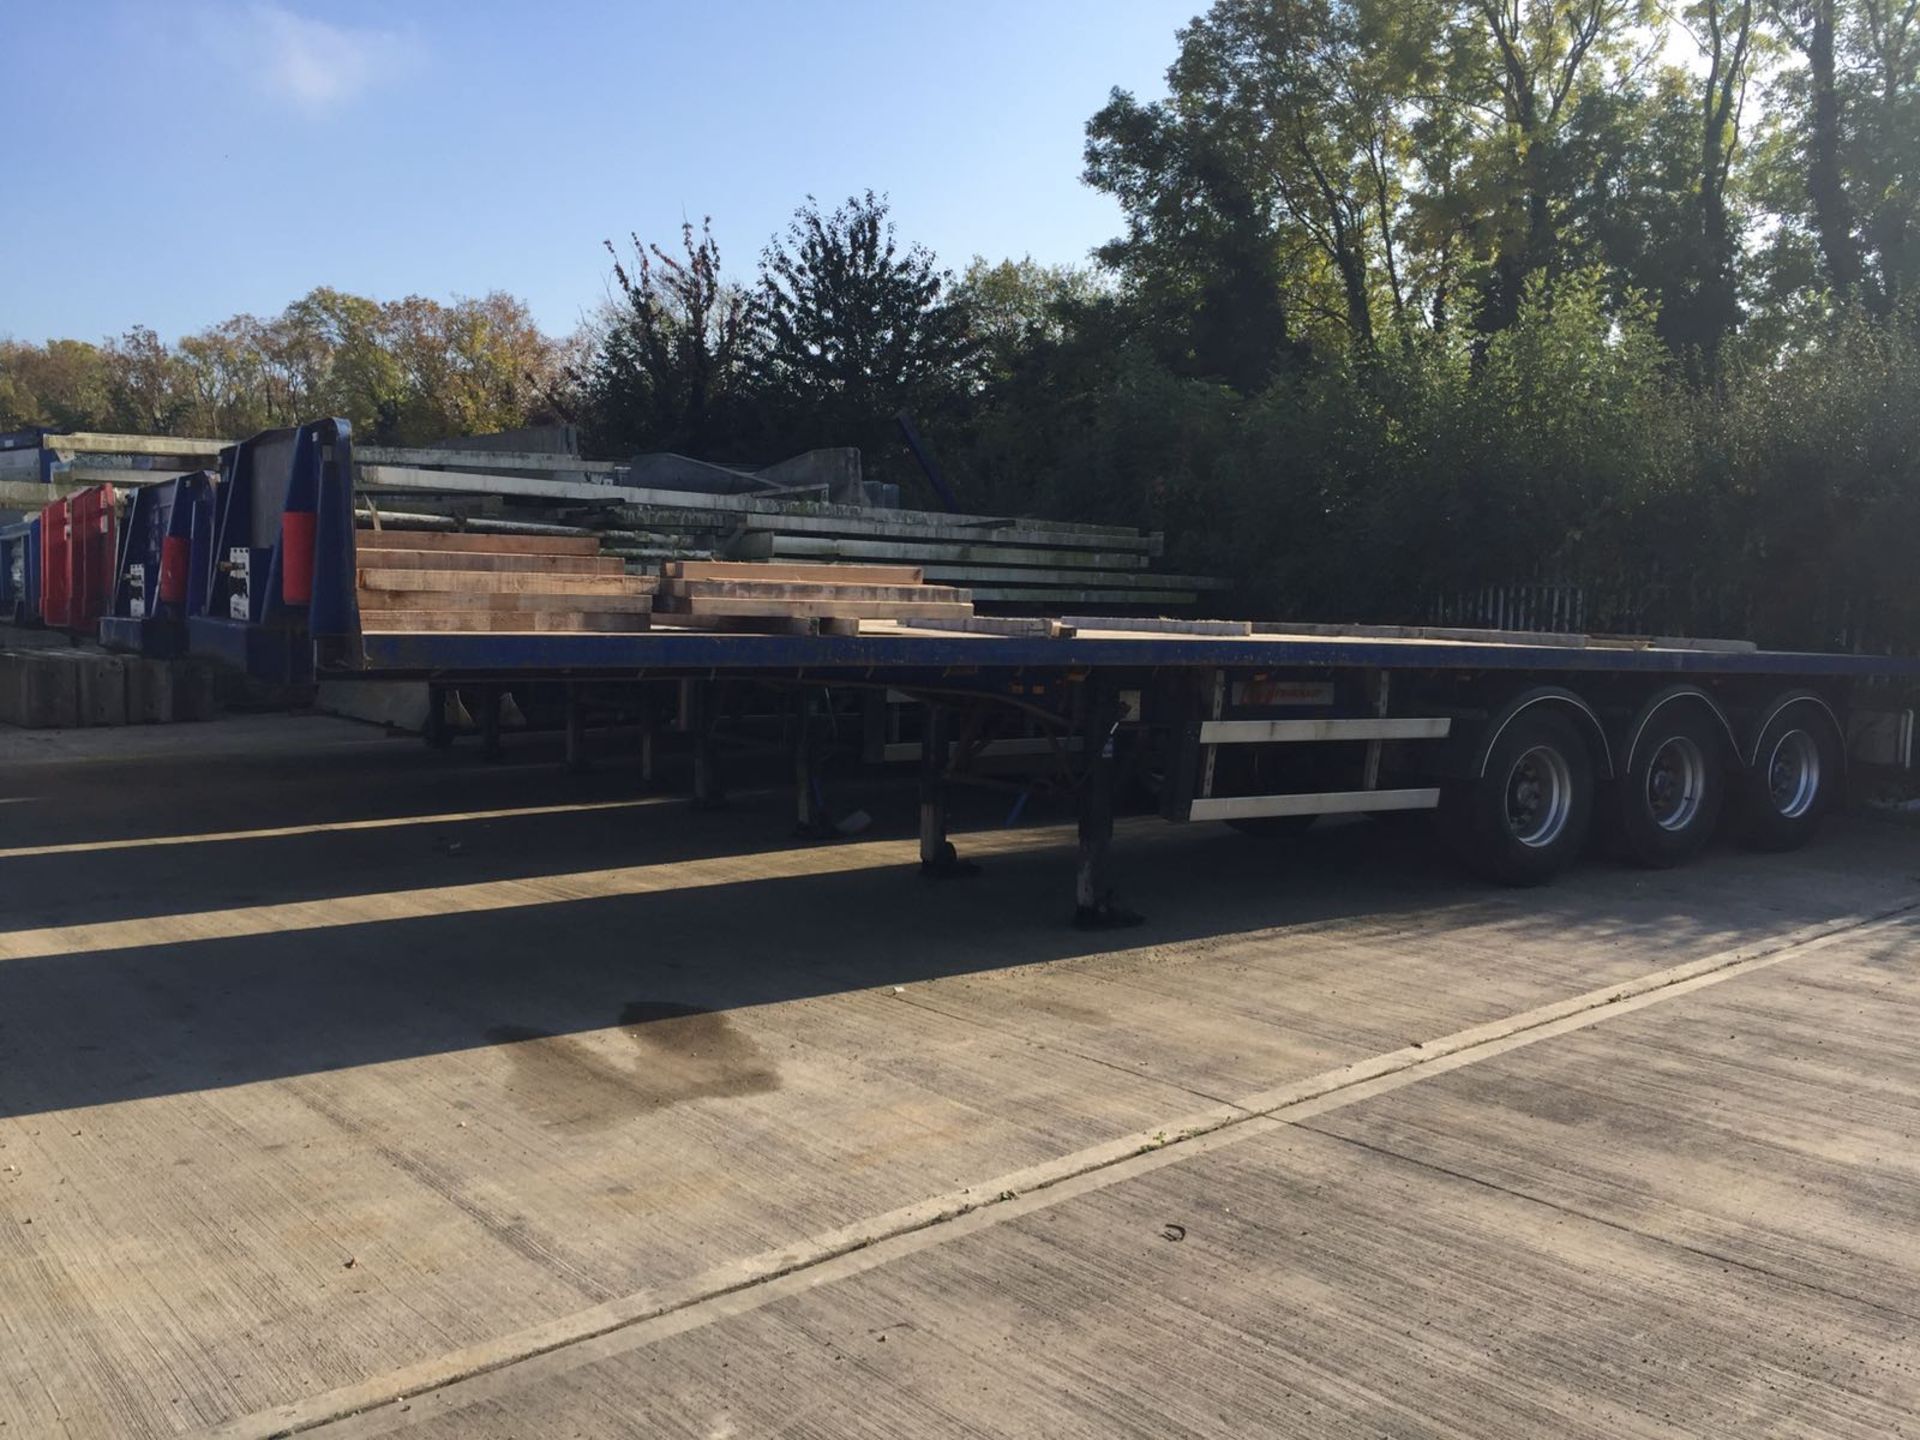 2003 36FT TRI-AXLE TRAILER, STILL IN USE TESTED UNTIL 2017 - Image 4 of 7